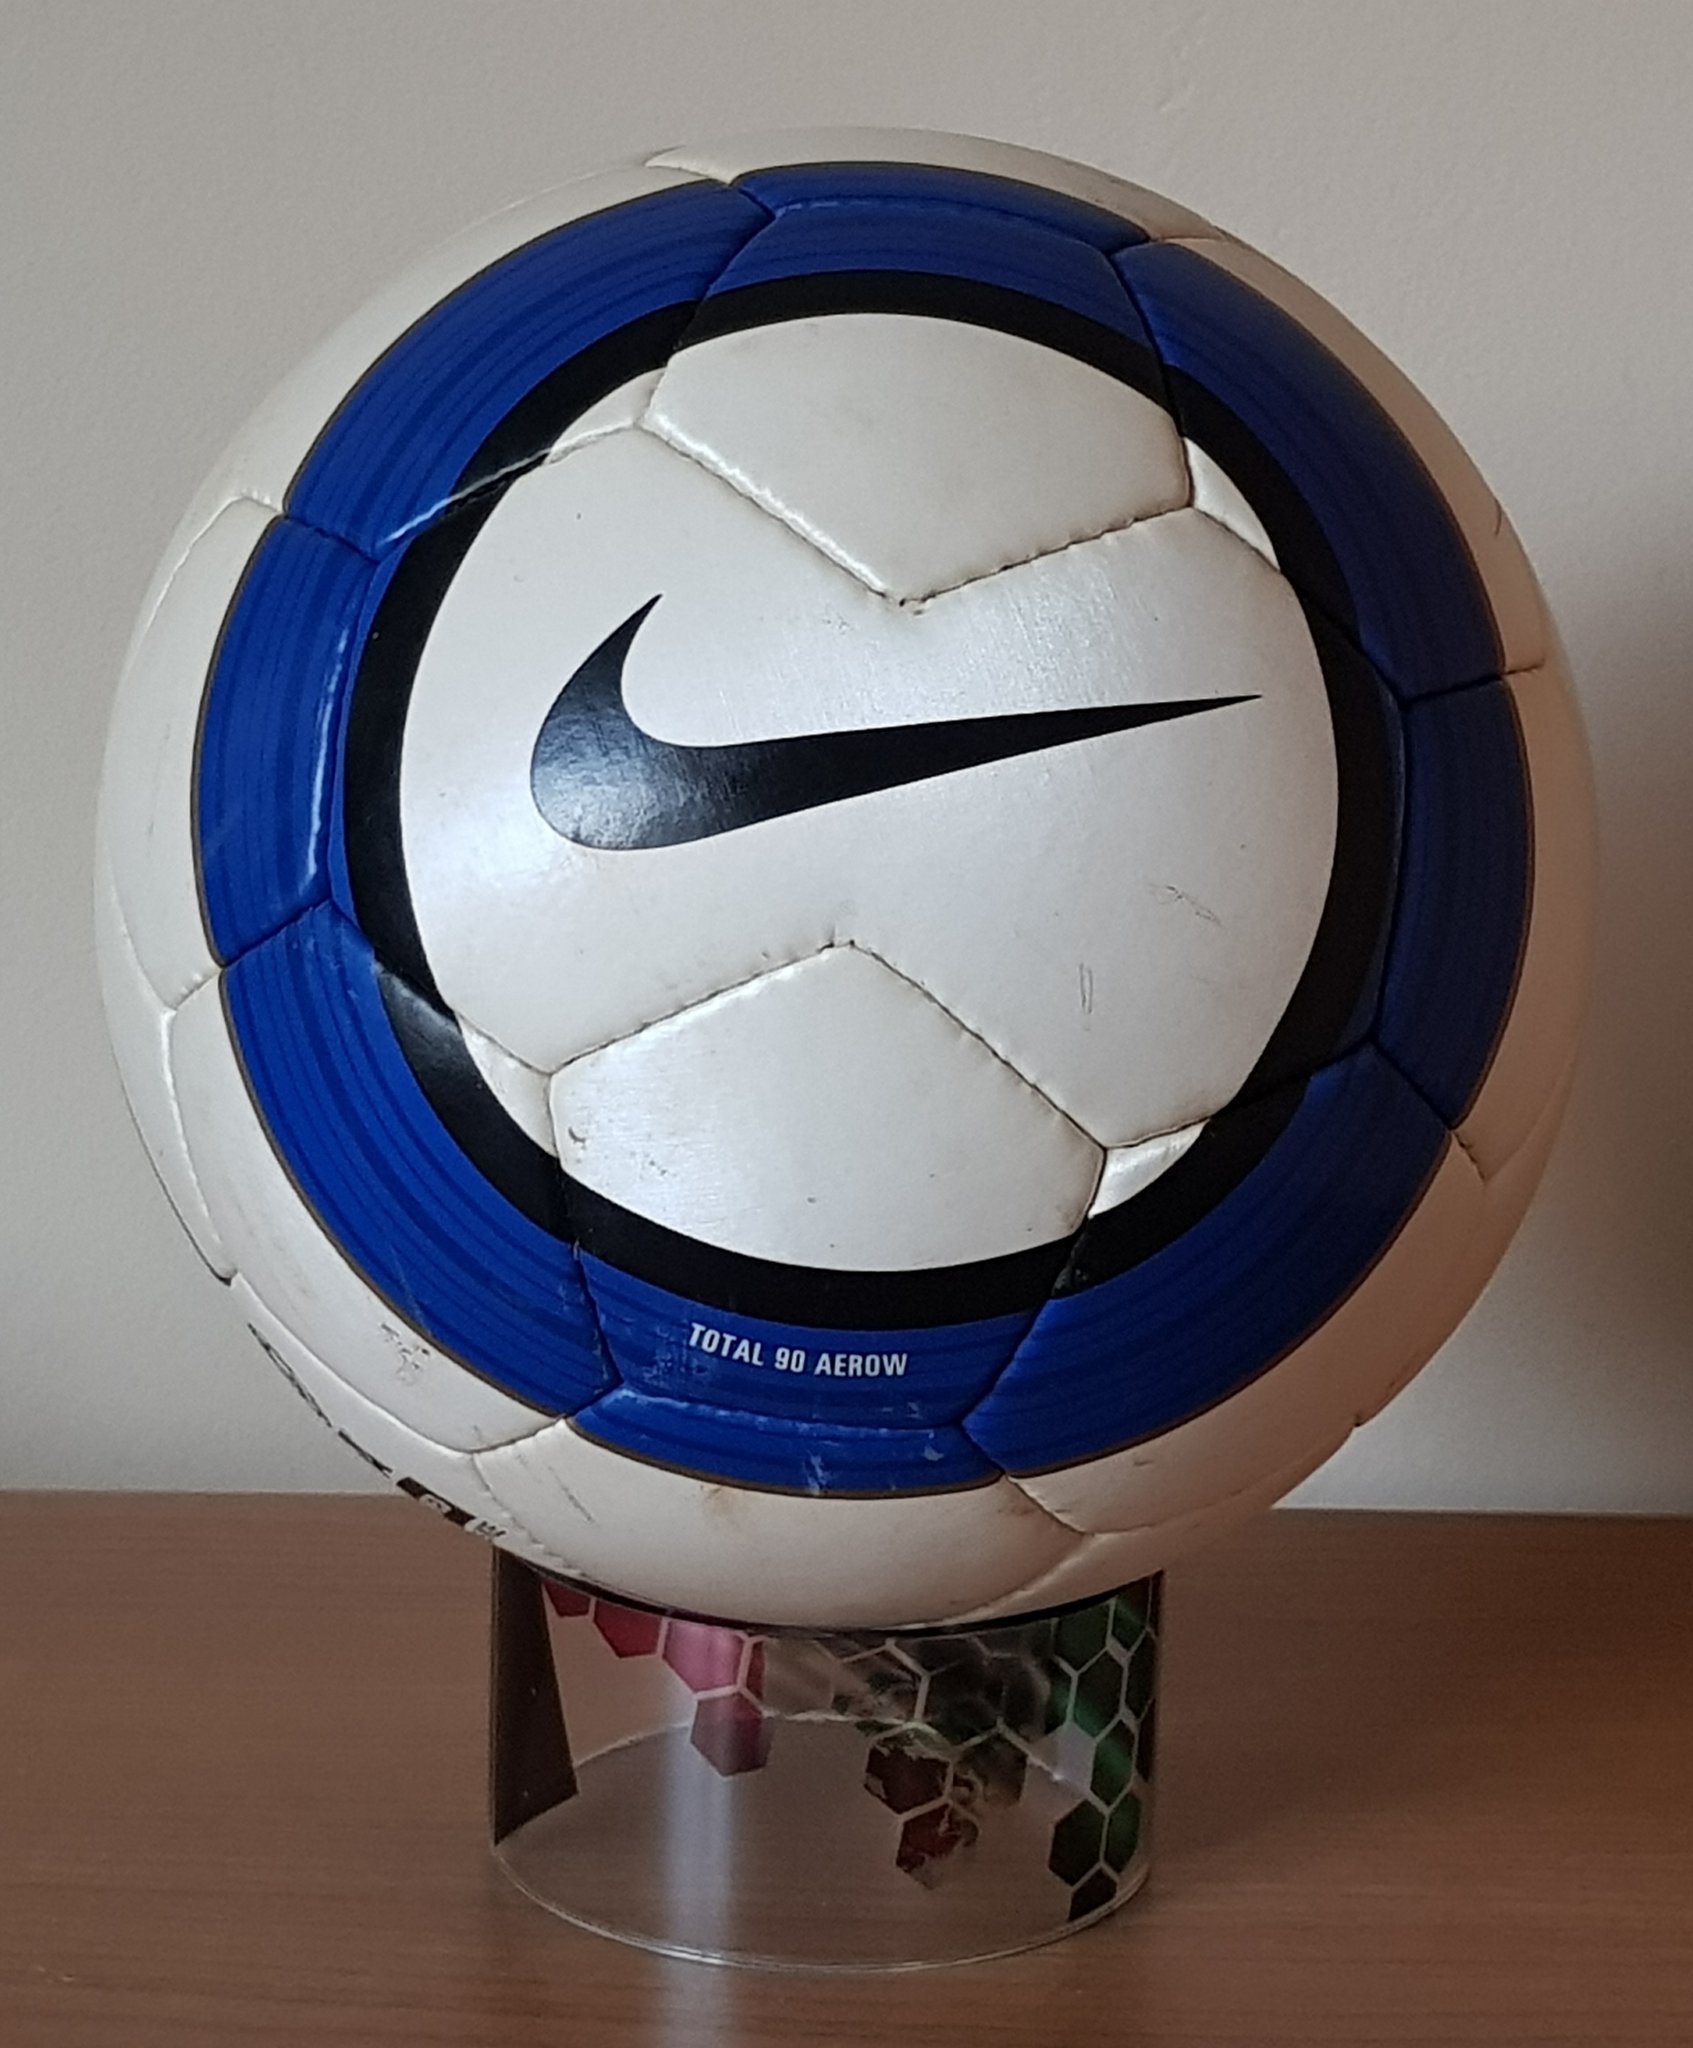 Venta ambulante dormir Sudán Rob Filby on Twitter: "Nike Total 90 Aerow English Barclays Premier League  Official Match Ball 2004/5 - Match Used #epl #niketotal90 #niket90  #matchused #omb #90sfootball https://t.co/KxfXuJMMJD" / Twitter